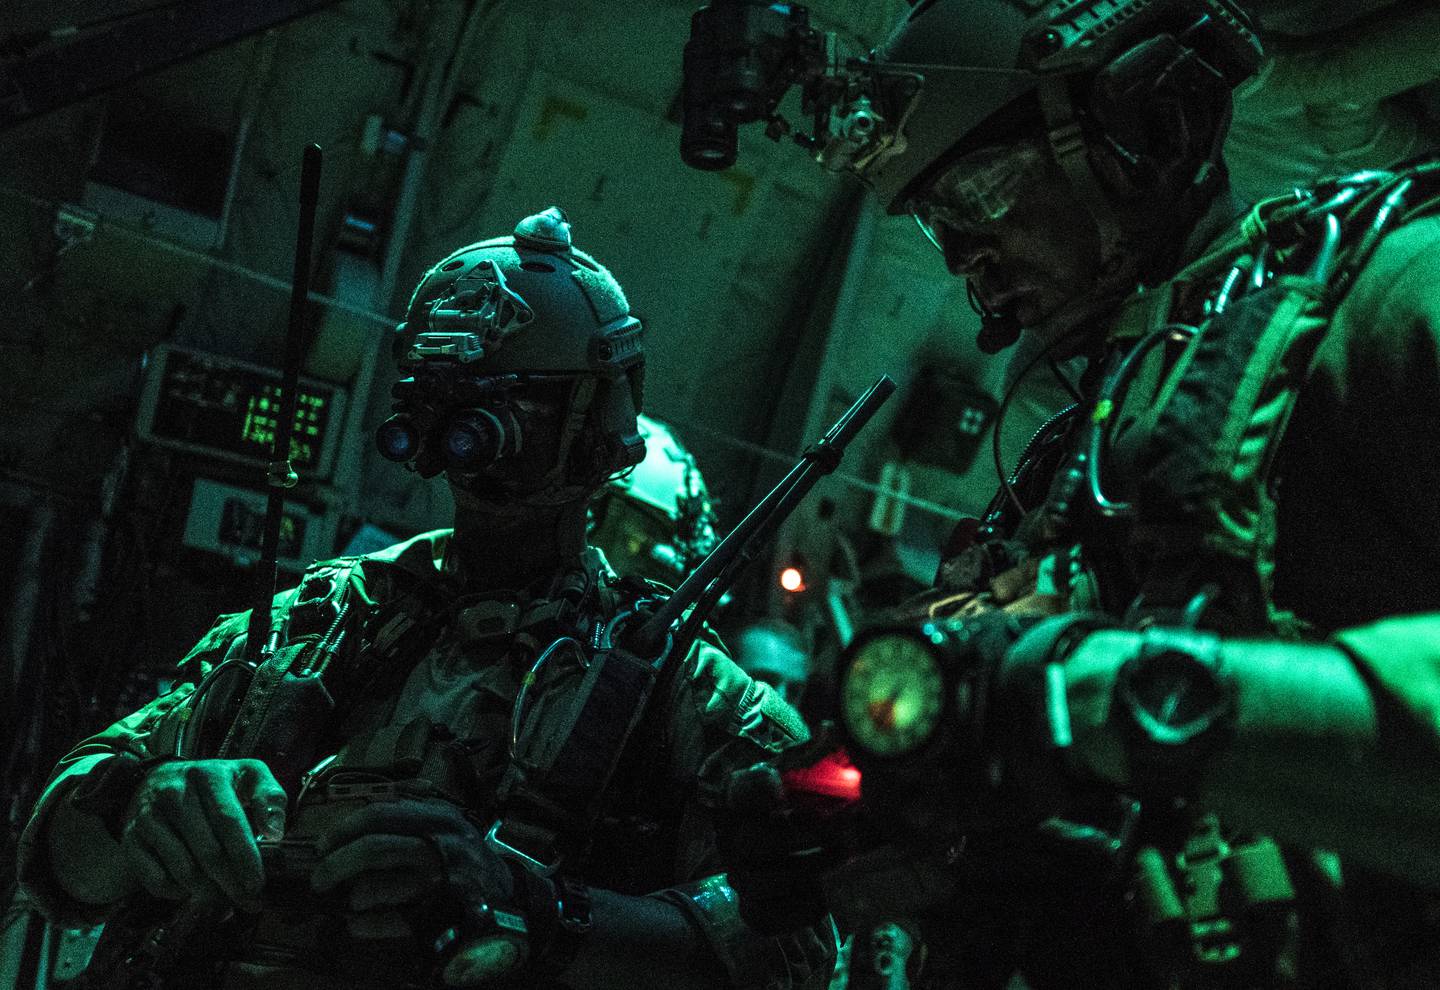 Troops with night vision gear